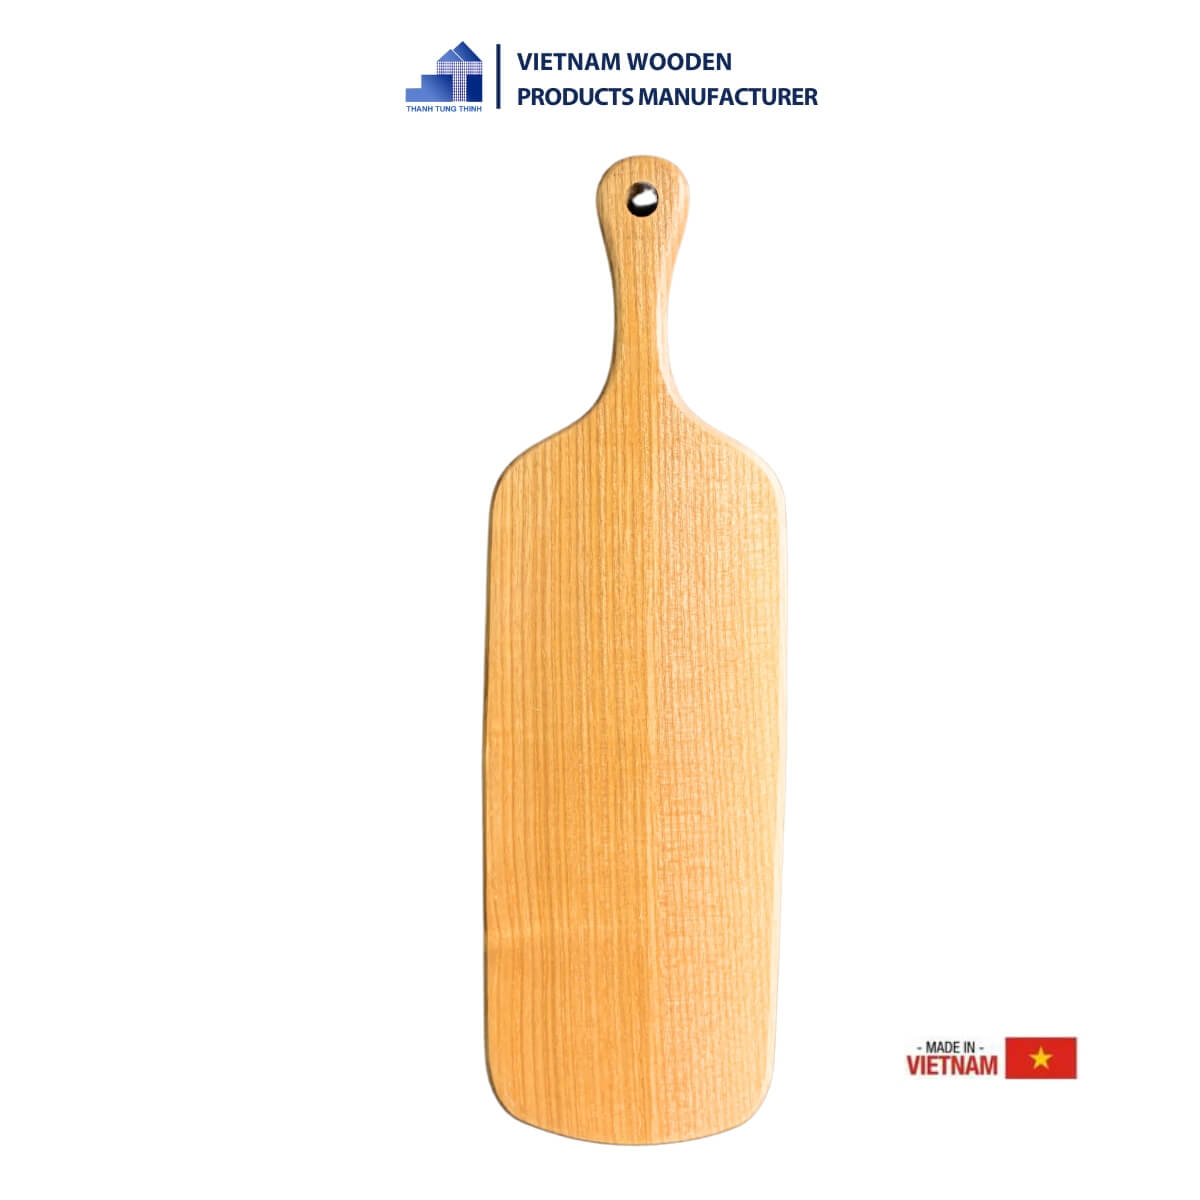 Wooden food tray with convenient handle.